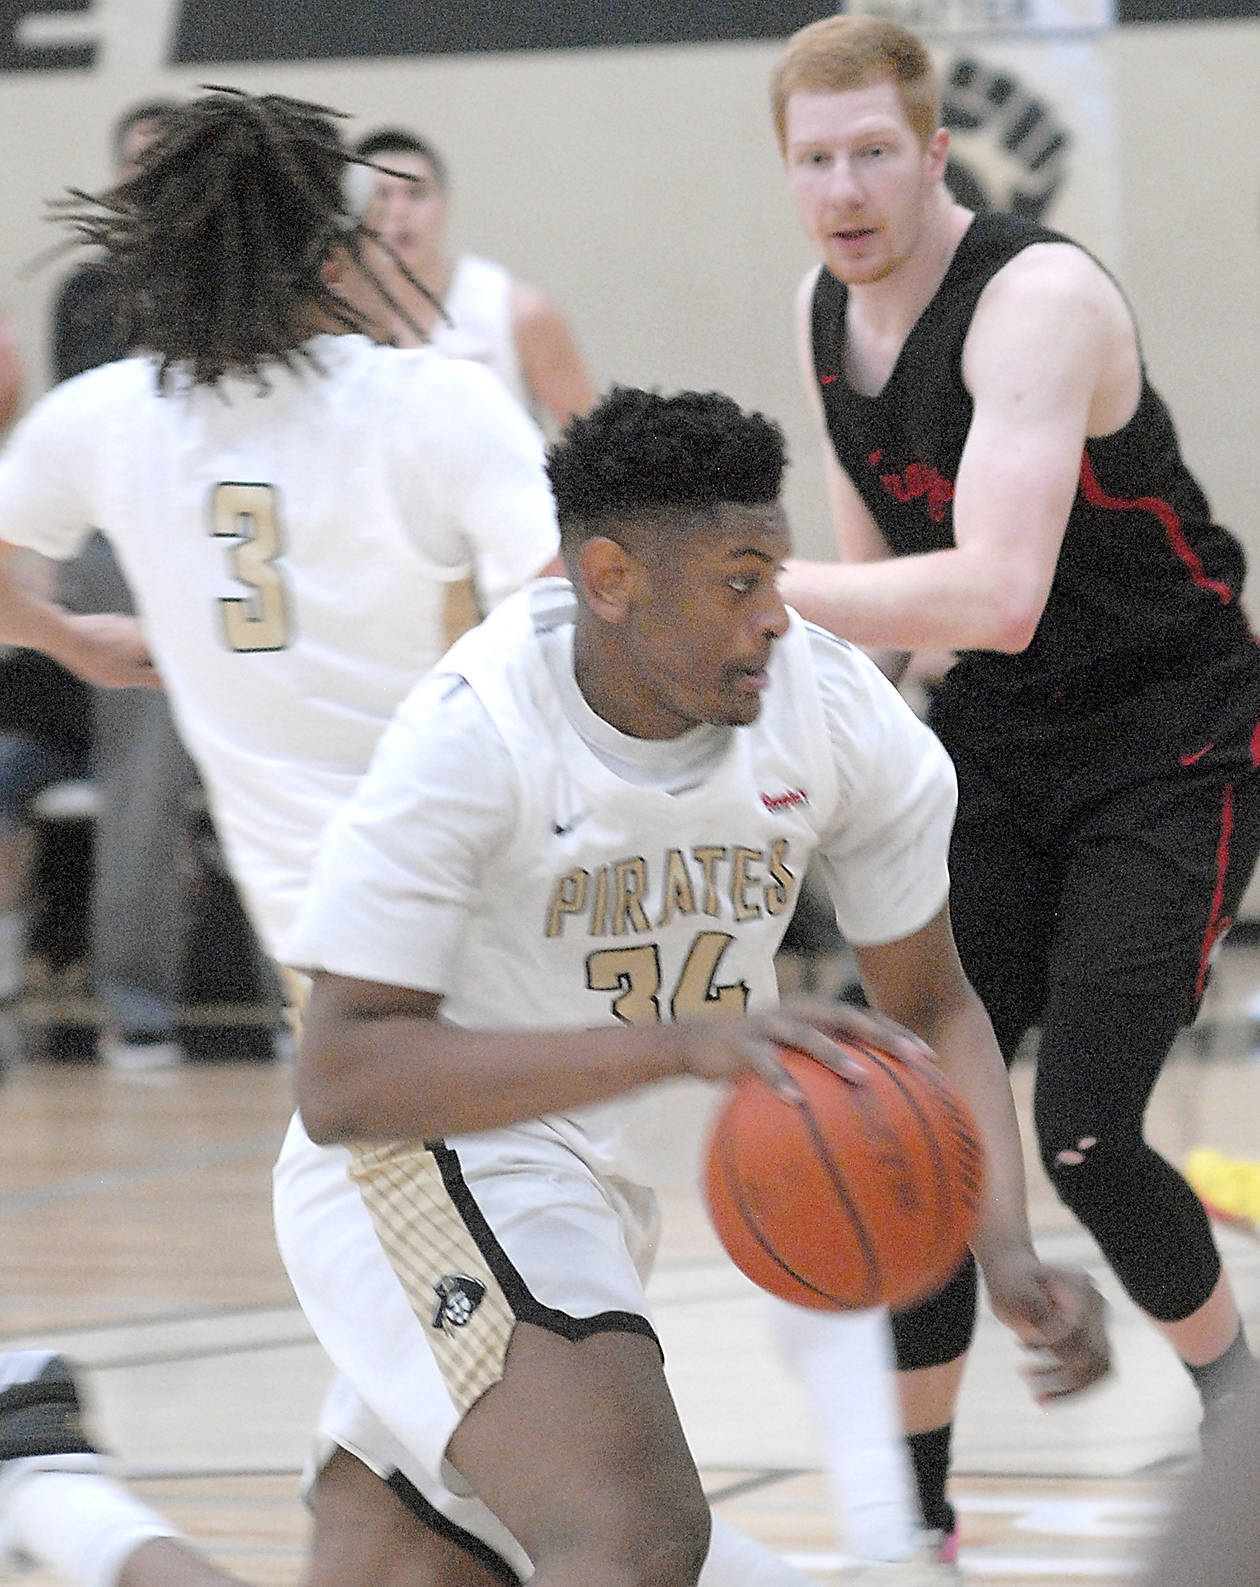 Keith Thorpe/Peninsula Daily News
Peninsula's Isiah Sampson, center, receives a block from teammate Jaylin Reed, left, to evade the defense of Everett's Devin Smith on Friday in Port Angeles.